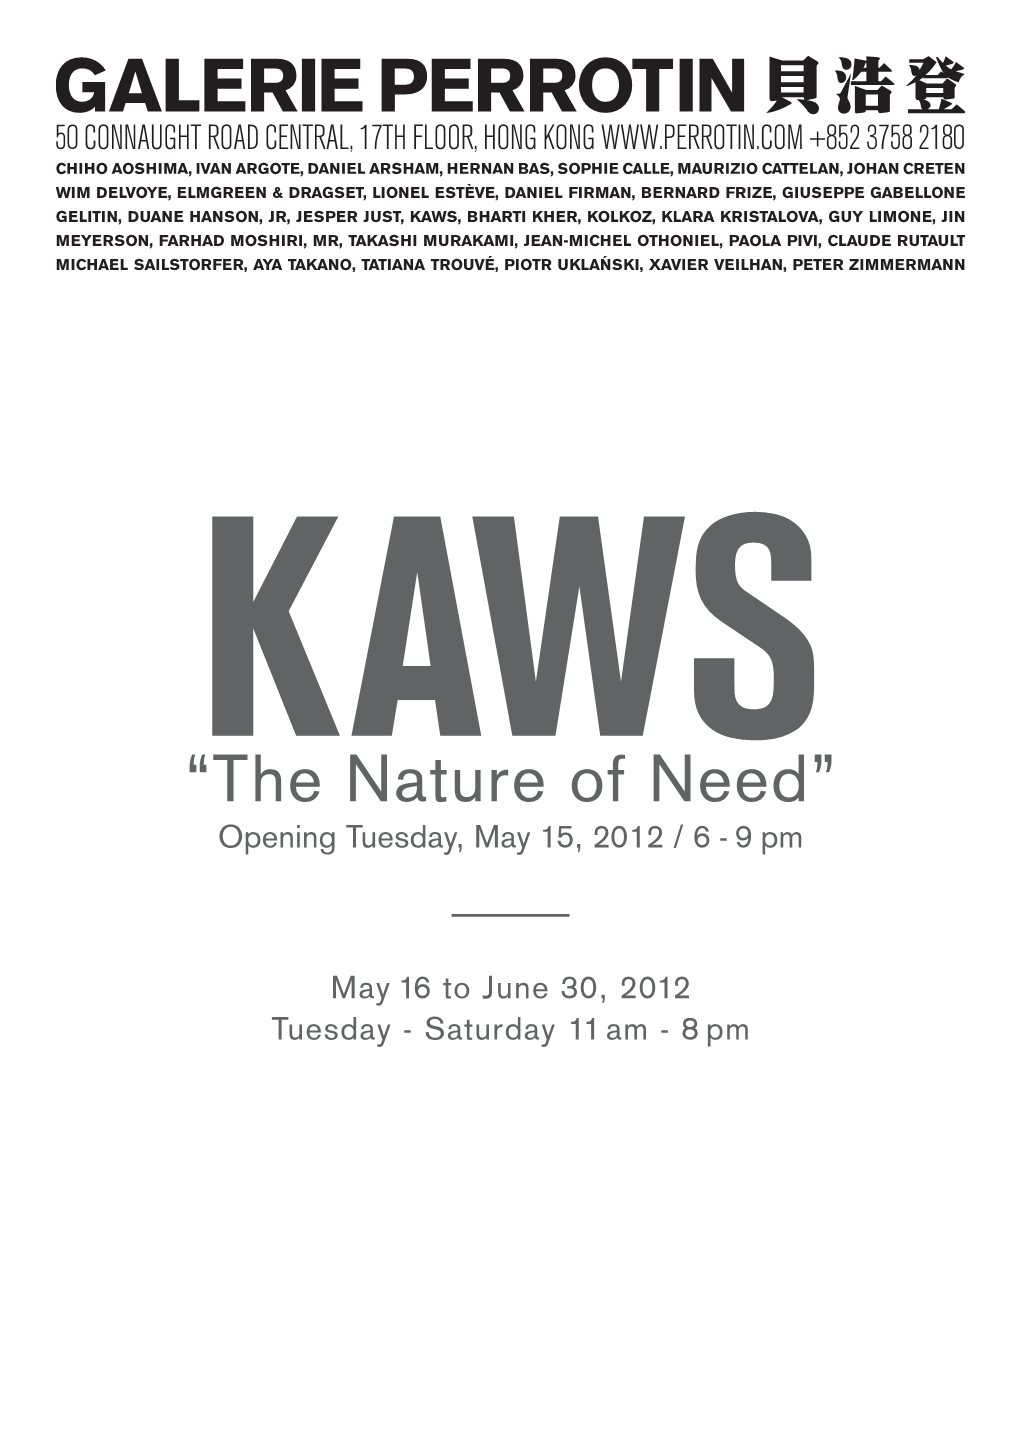 KAWS “The Nature of Need” Opening Tuesday, May 15, 2012 / 6 - 9 Pm